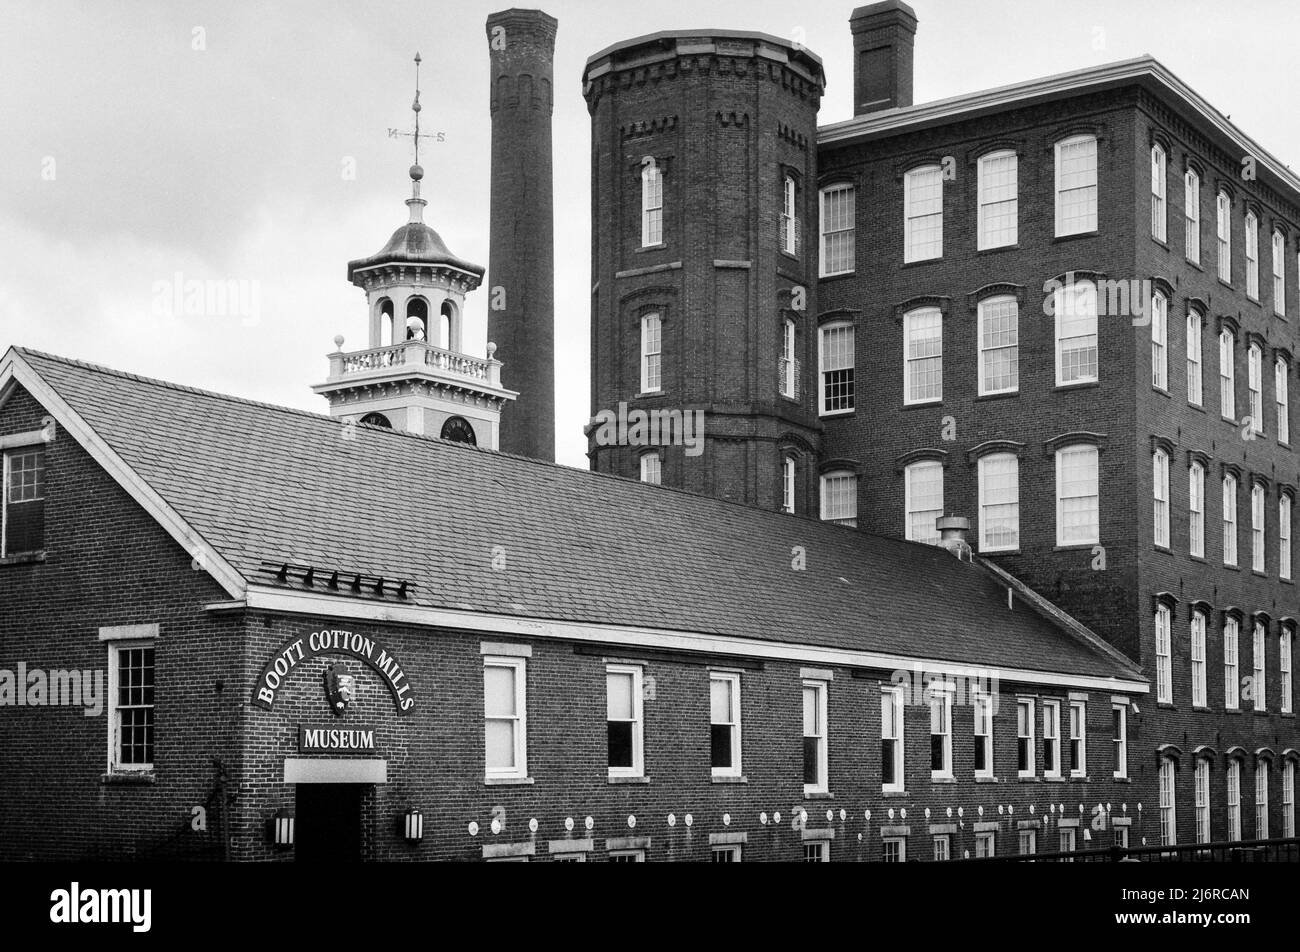 The Boott Cotton Mills Museum in historic Lowell, Massachusetts. Landscape view. Captured on analog black and white film. Lowell, Massachusetts.g Stock Photo